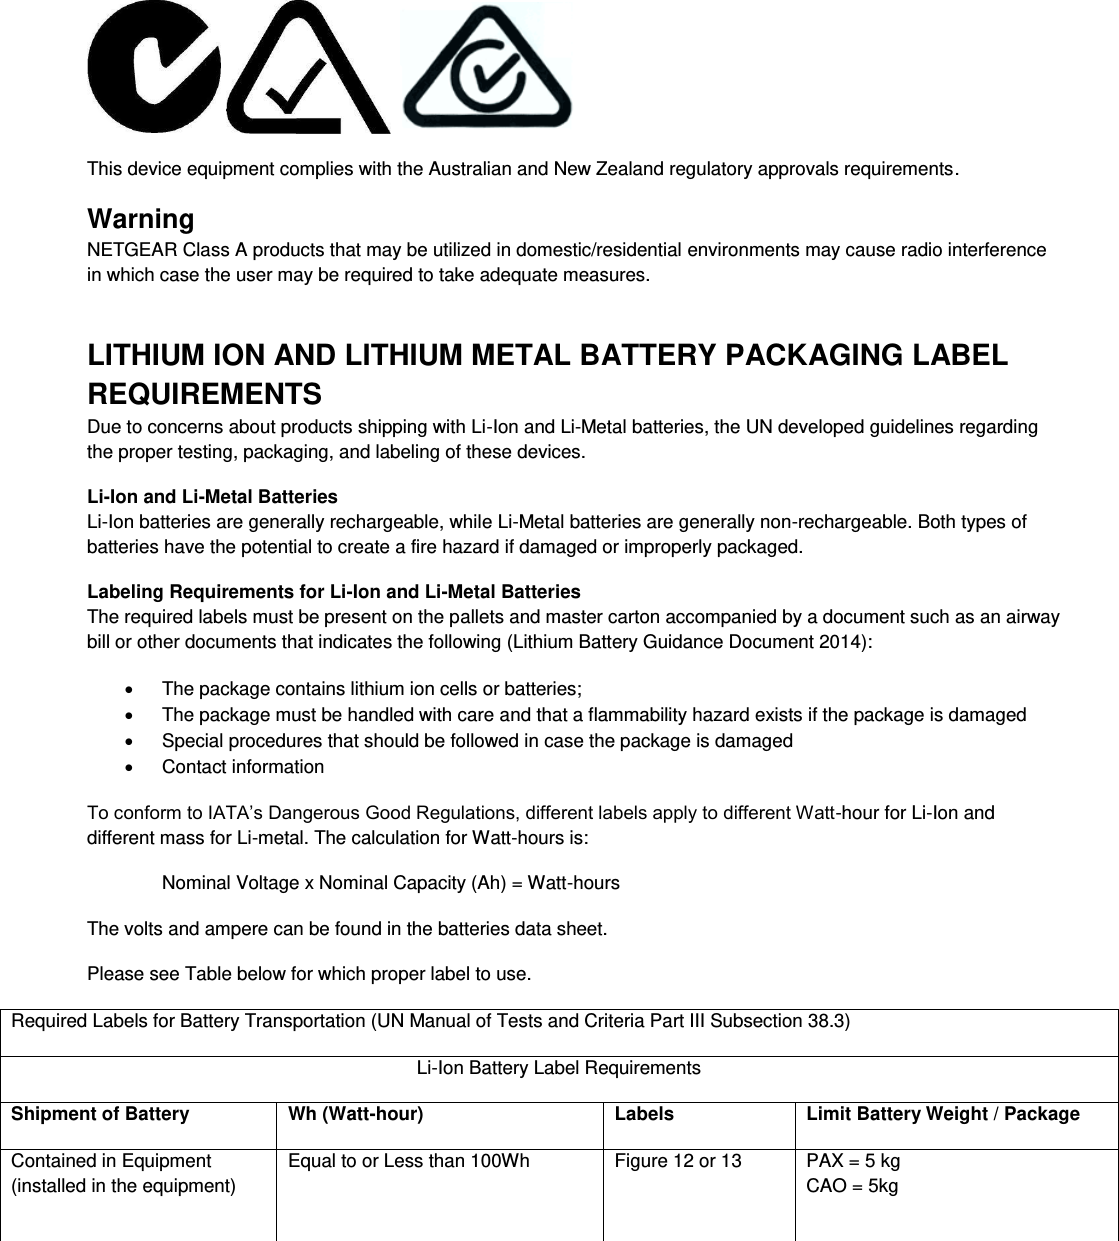       This device equipment complies with the Australian and New Zealand regulatory approvals requirements. Warning NETGEAR Class A products that may be utilized in domestic/residential environments may cause radio interference in which case the user may be required to take adequate measures.  LITHIUM ION AND LITHIUM METAL BATTERY PACKAGING LABEL REQUIREMENTS  Due to concerns about products shipping with Li-Ion and Li-Metal batteries, the UN developed guidelines regarding the proper testing, packaging, and labeling of these devices.  Li-Ion and Li-Metal Batteries Li-Ion batteries are generally rechargeable, while Li-Metal batteries are generally non-rechargeable. Both types of batteries have the potential to create a fire hazard if damaged or improperly packaged.  Labeling Requirements for Li-Ion and Li-Metal Batteries The required labels must be present on the pallets and master carton accompanied by a document such as an airway bill or other documents that indicates the following (Lithium Battery Guidance Document 2014):   The package contains lithium ion cells or batteries;   The package must be handled with care and that a flammability hazard exists if the package is damaged   Special procedures that should be followed in case the package is damaged   Contact information To conform to IATA’s Dangerous Good Regulations, different labels apply to different Watt-hour for Li-Ion and different mass for Li-metal. The calculation for Watt-hours is: Nominal Voltage x Nominal Capacity (Ah) = Watt-hours The volts and ampere can be found in the batteries data sheet. Please see Table below for which proper label to use. Required Labels for Battery Transportation (UN Manual of Tests and Criteria Part III Subsection 38.3) Li-Ion Battery Label Requirements Shipment of Battery Wh (Watt-hour) Labels Limit Battery Weight / Package Contained in Equipment (installed in the equipment) Equal to or Less than 100Wh  Figure 12 or 13  PAX = 5 kg CAO = 5kg 